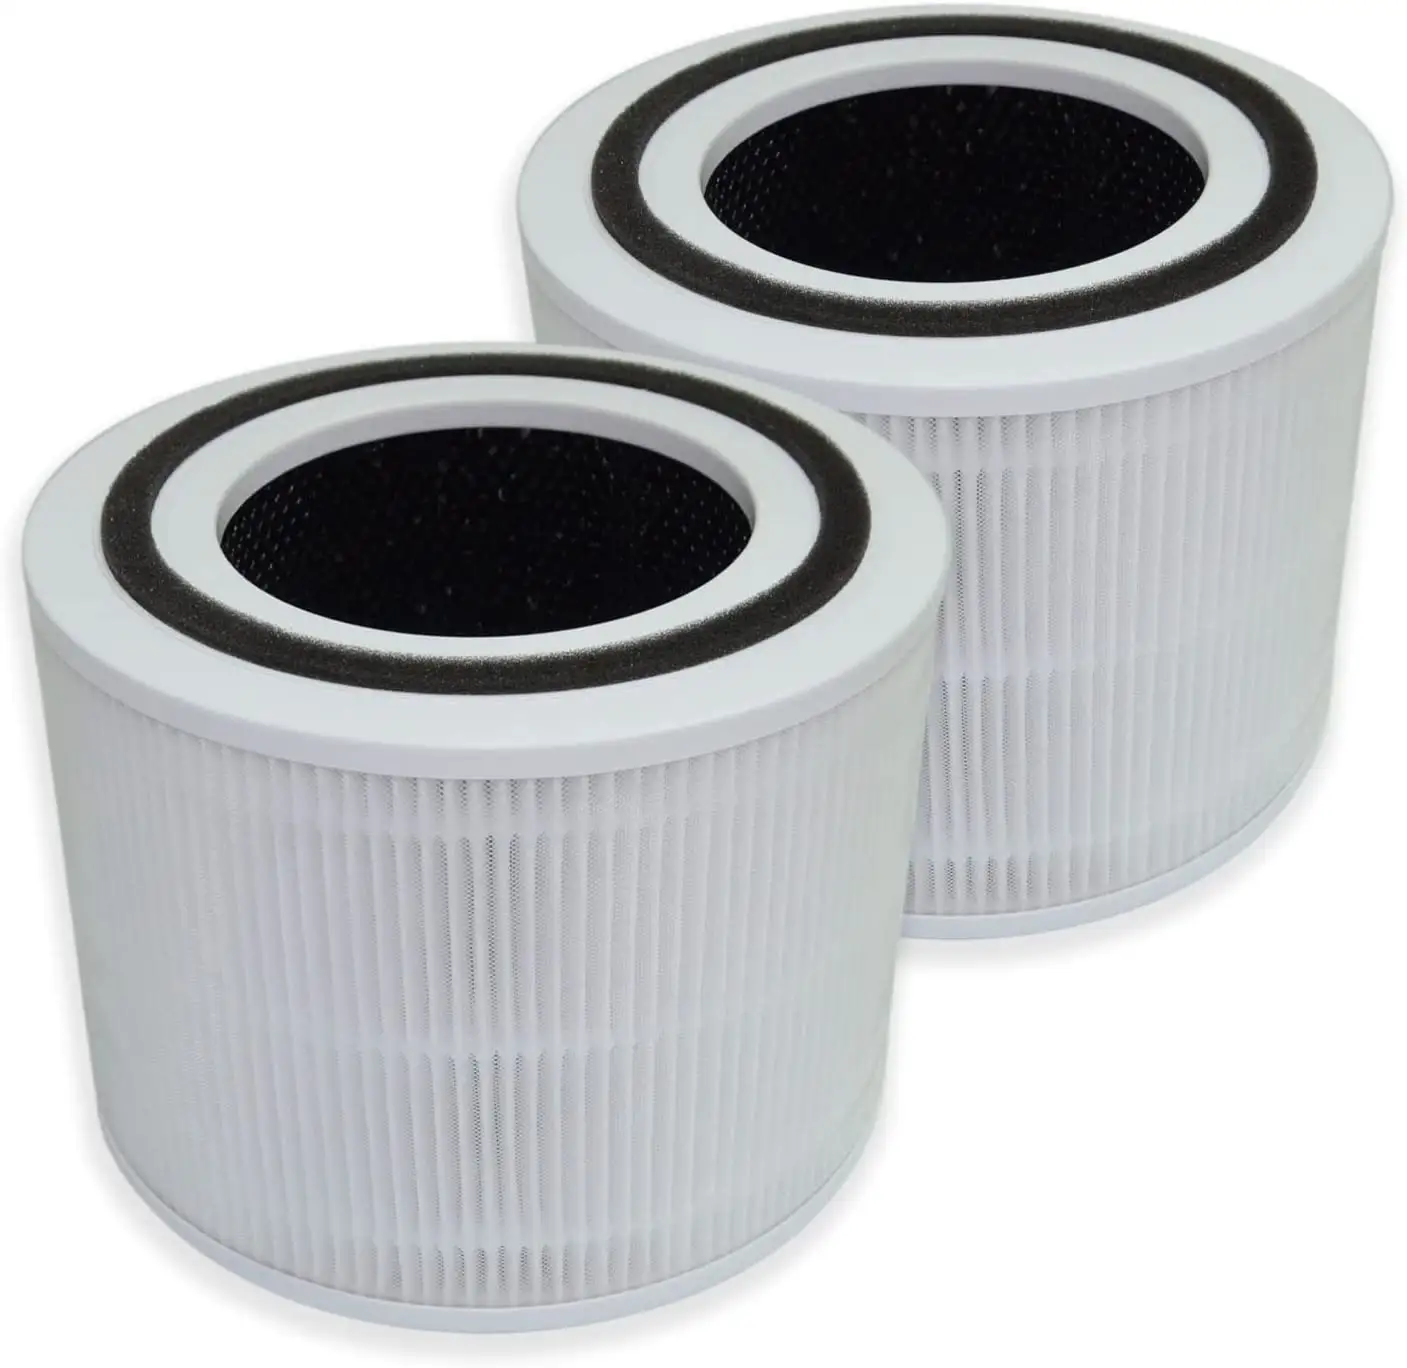 True Activated Carbon Filter For Calmysts HEPA-14 PRO Purple Color Air Purifier Filters Air Filter Parts